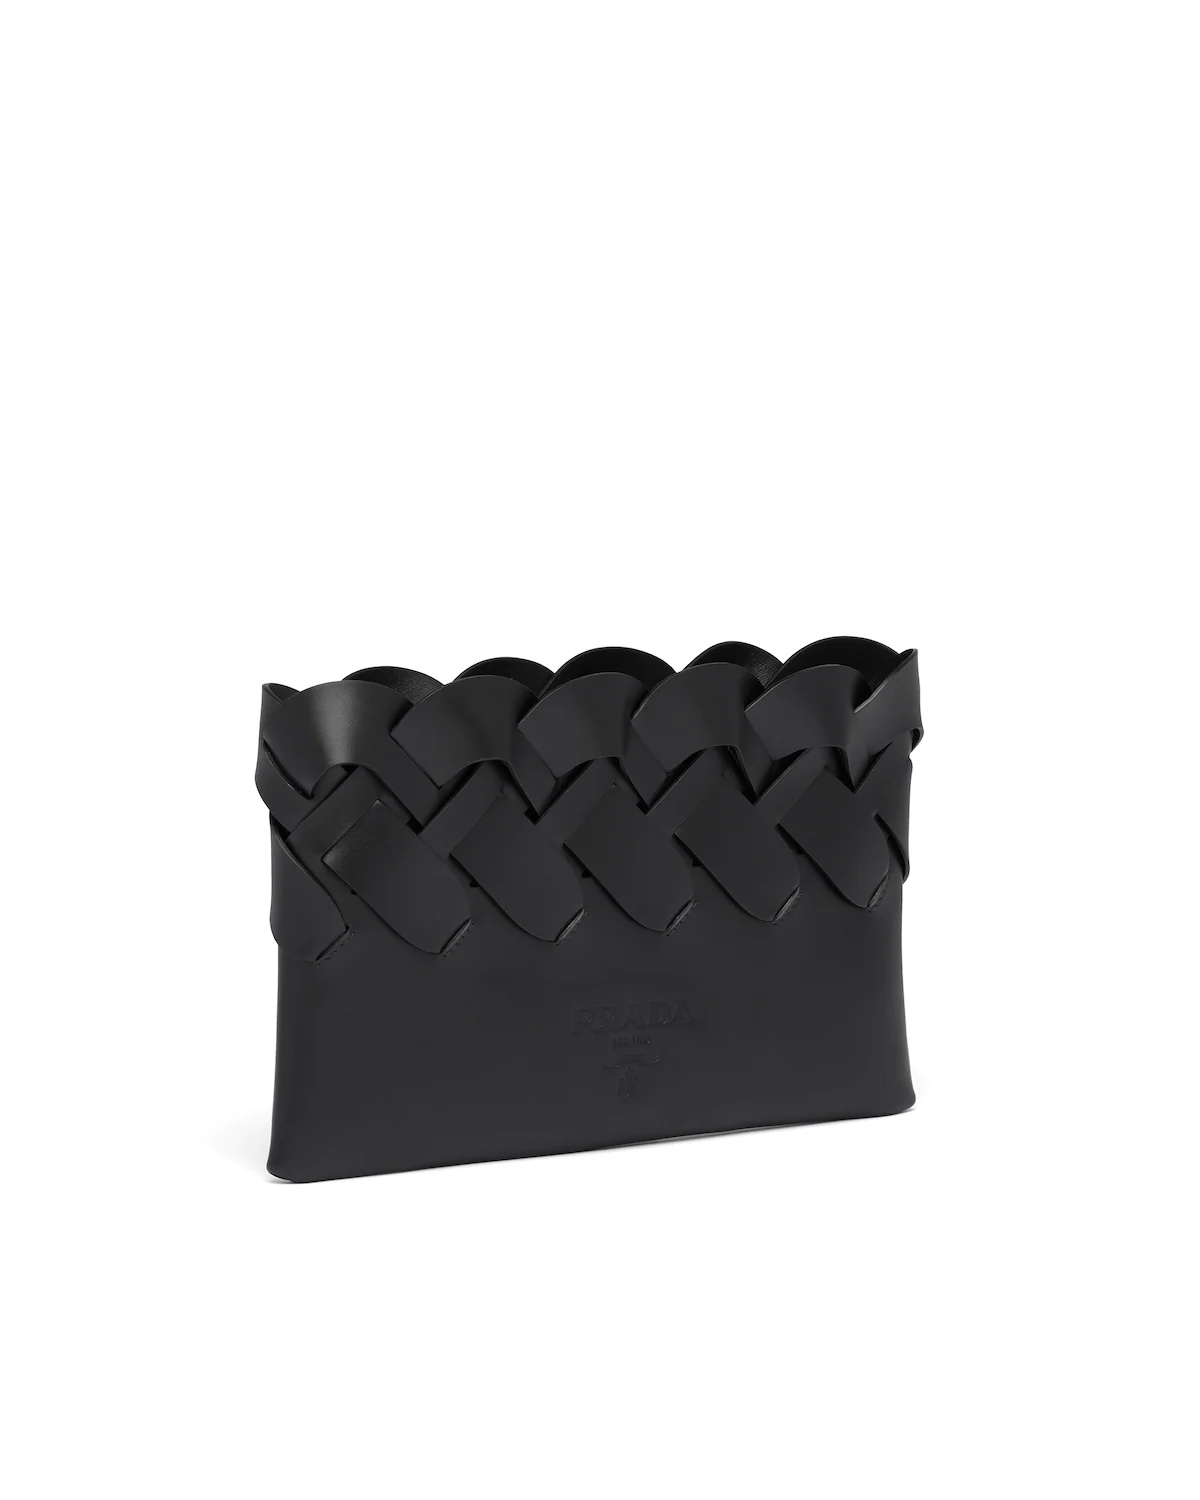 Prada Tress leather clutch with large woven motif - 3